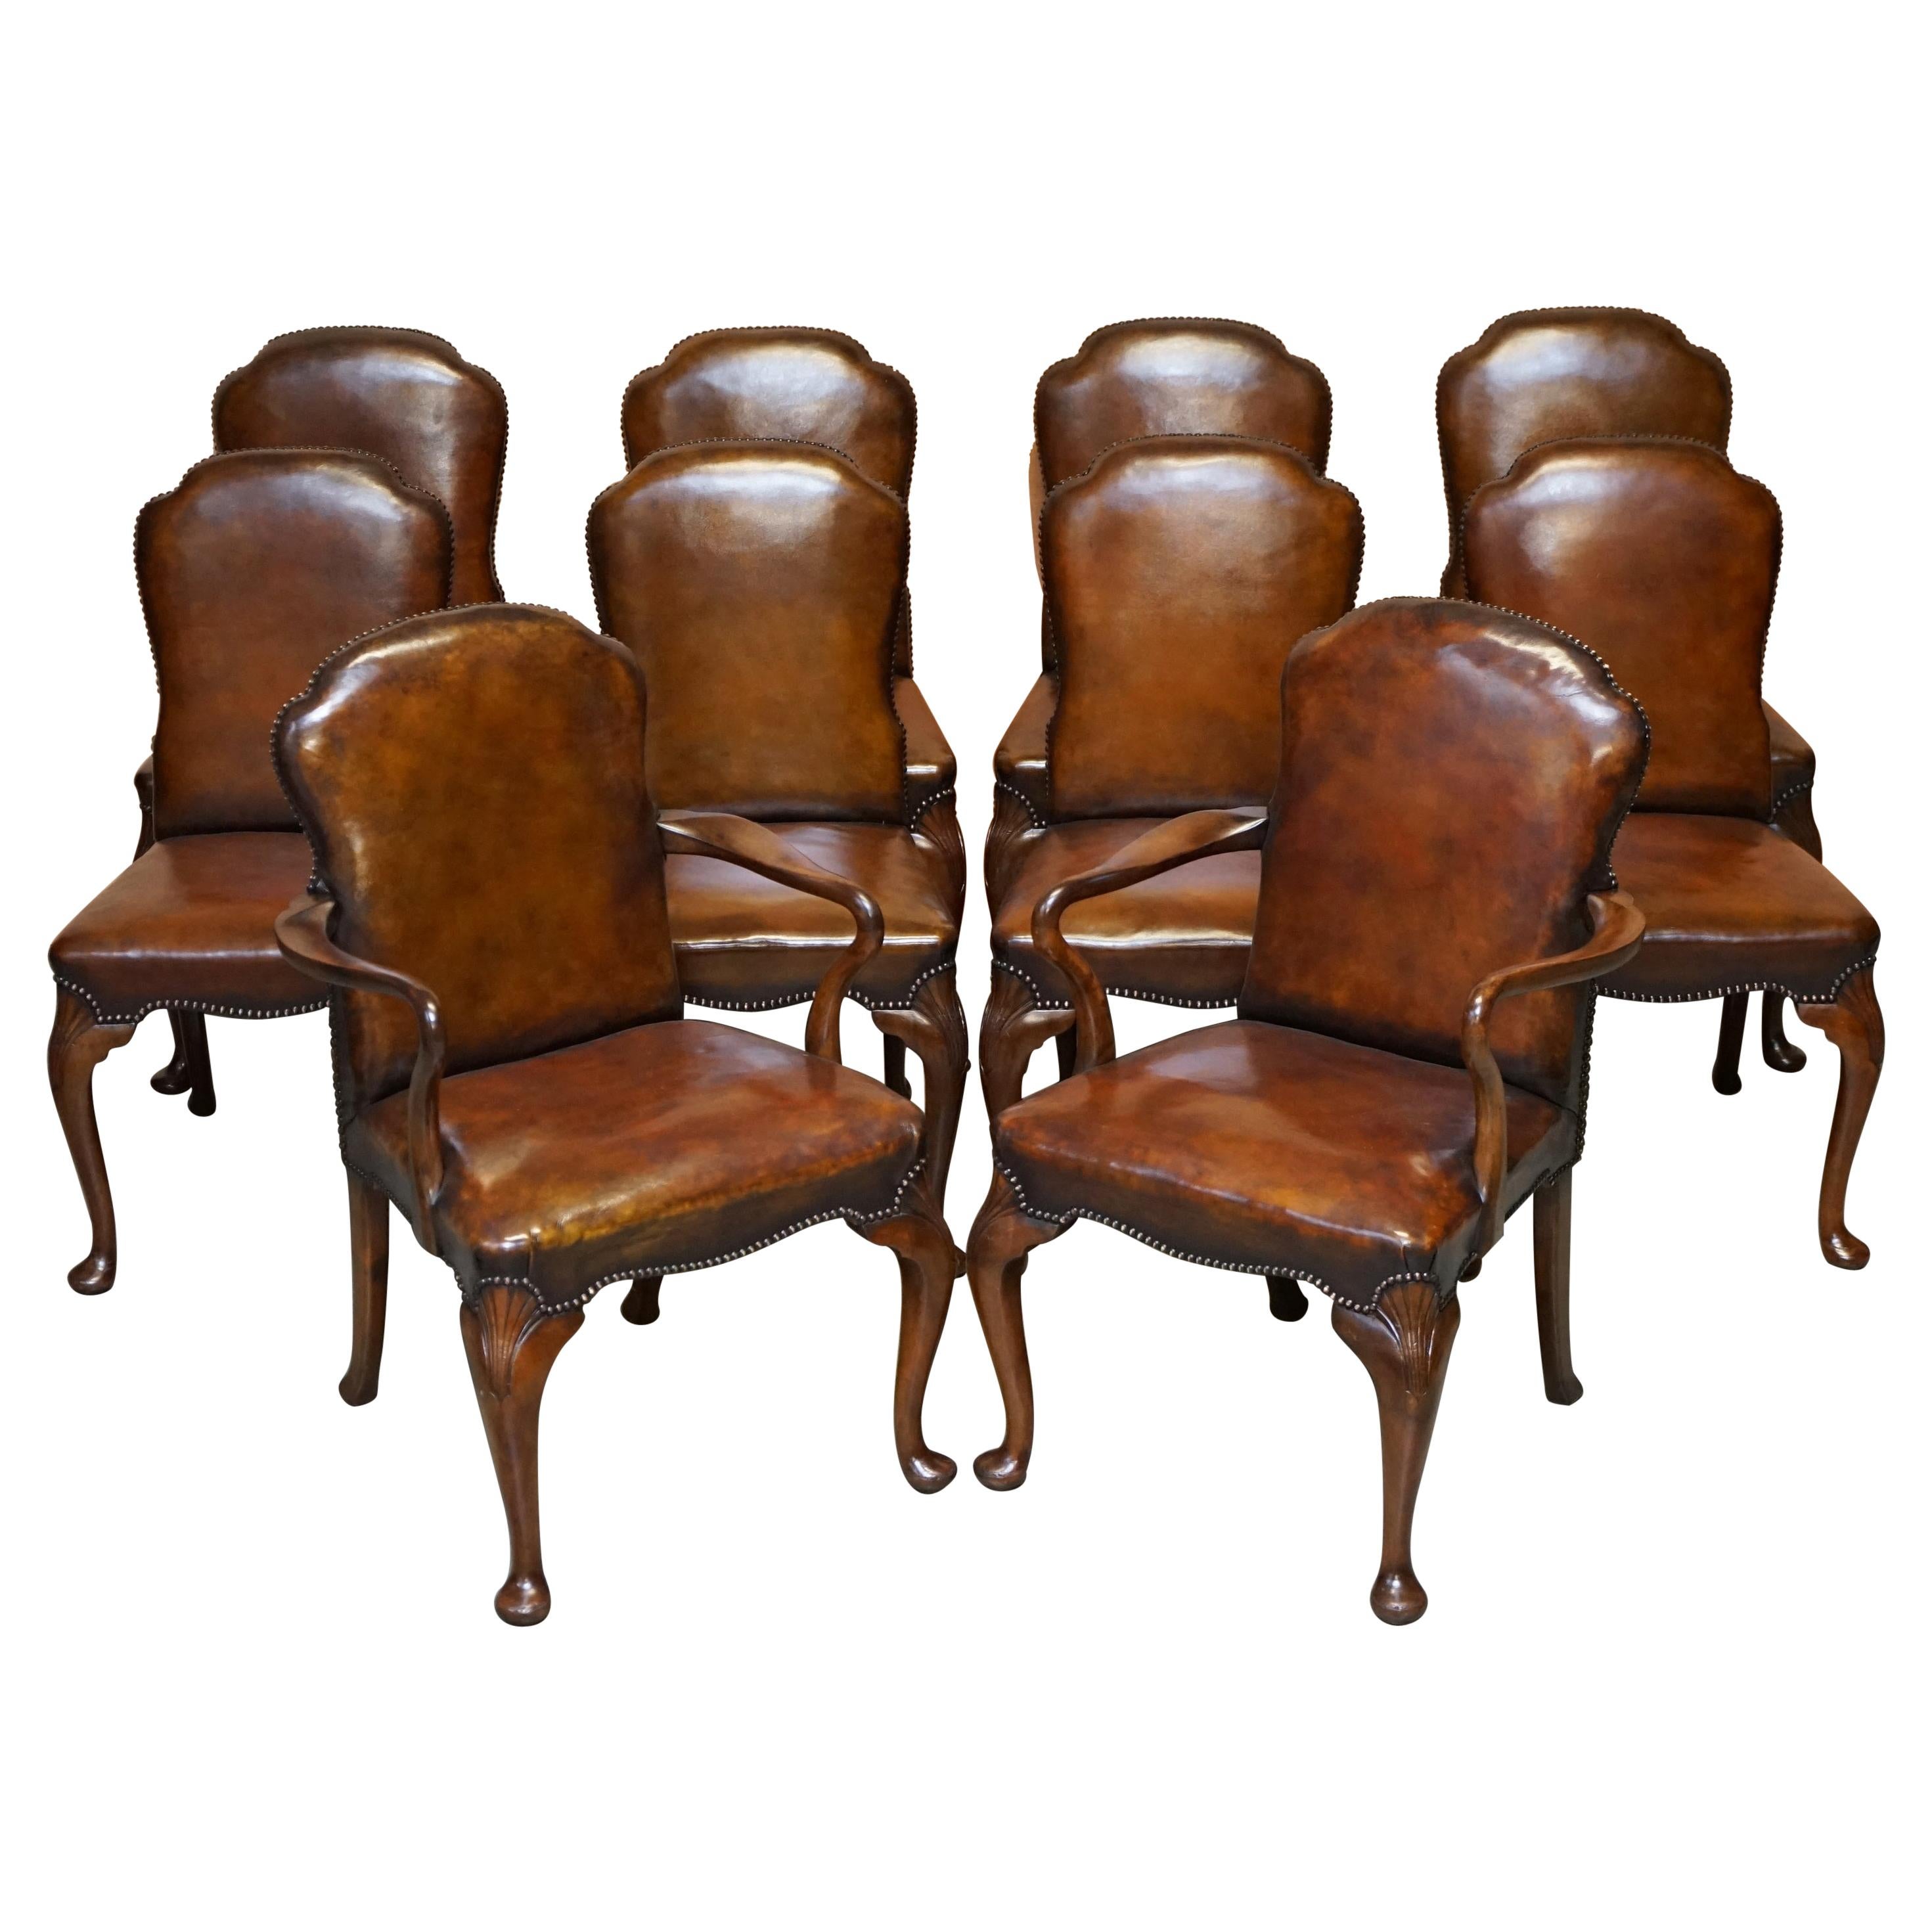 10 Victorian 1880 Walnut Shepherds Crook Hand Dyed Brown Leather Dining Chairs